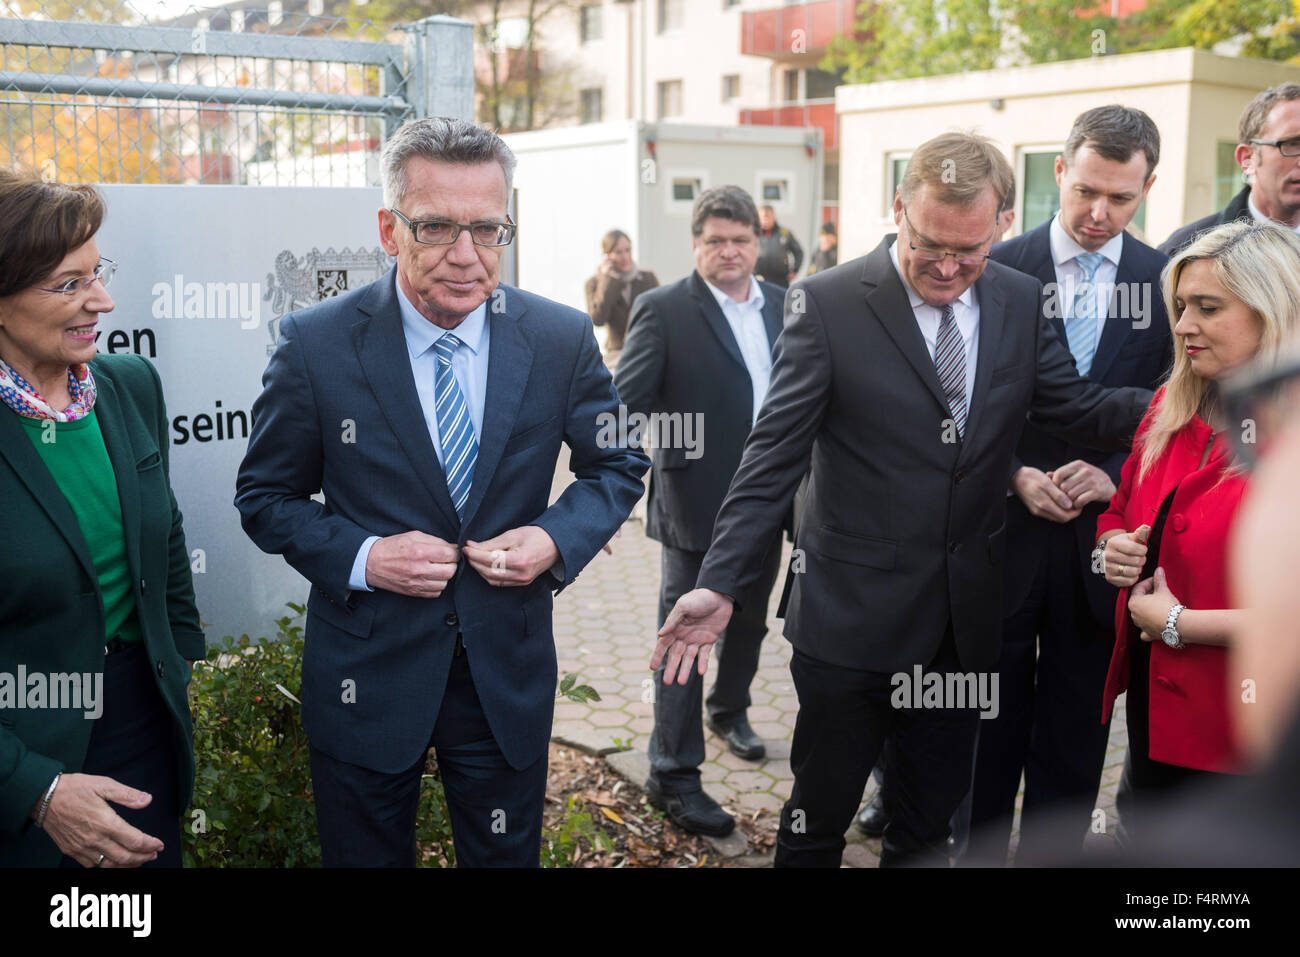 Bamberg, Germany. 22nd Oct, 2015. German Interior Minister Thomas de Maiziere (2.f.L) arrives with Bavarian State Minister for Family and Social Affairs Emilia Mueller (L), Mayor of Bamberg Andreas Starke (2.f.R.), and the Bavarian State Minister for Health Melanie Huml (R) for a press conference in Bamberg, Germany, 22 October 2015. De Maiziere is visiting the repatriation center for Balkan refugees in Bamberg. Photo: NICOLAS ARMER/dpa/Alamy Live News Stock Photo